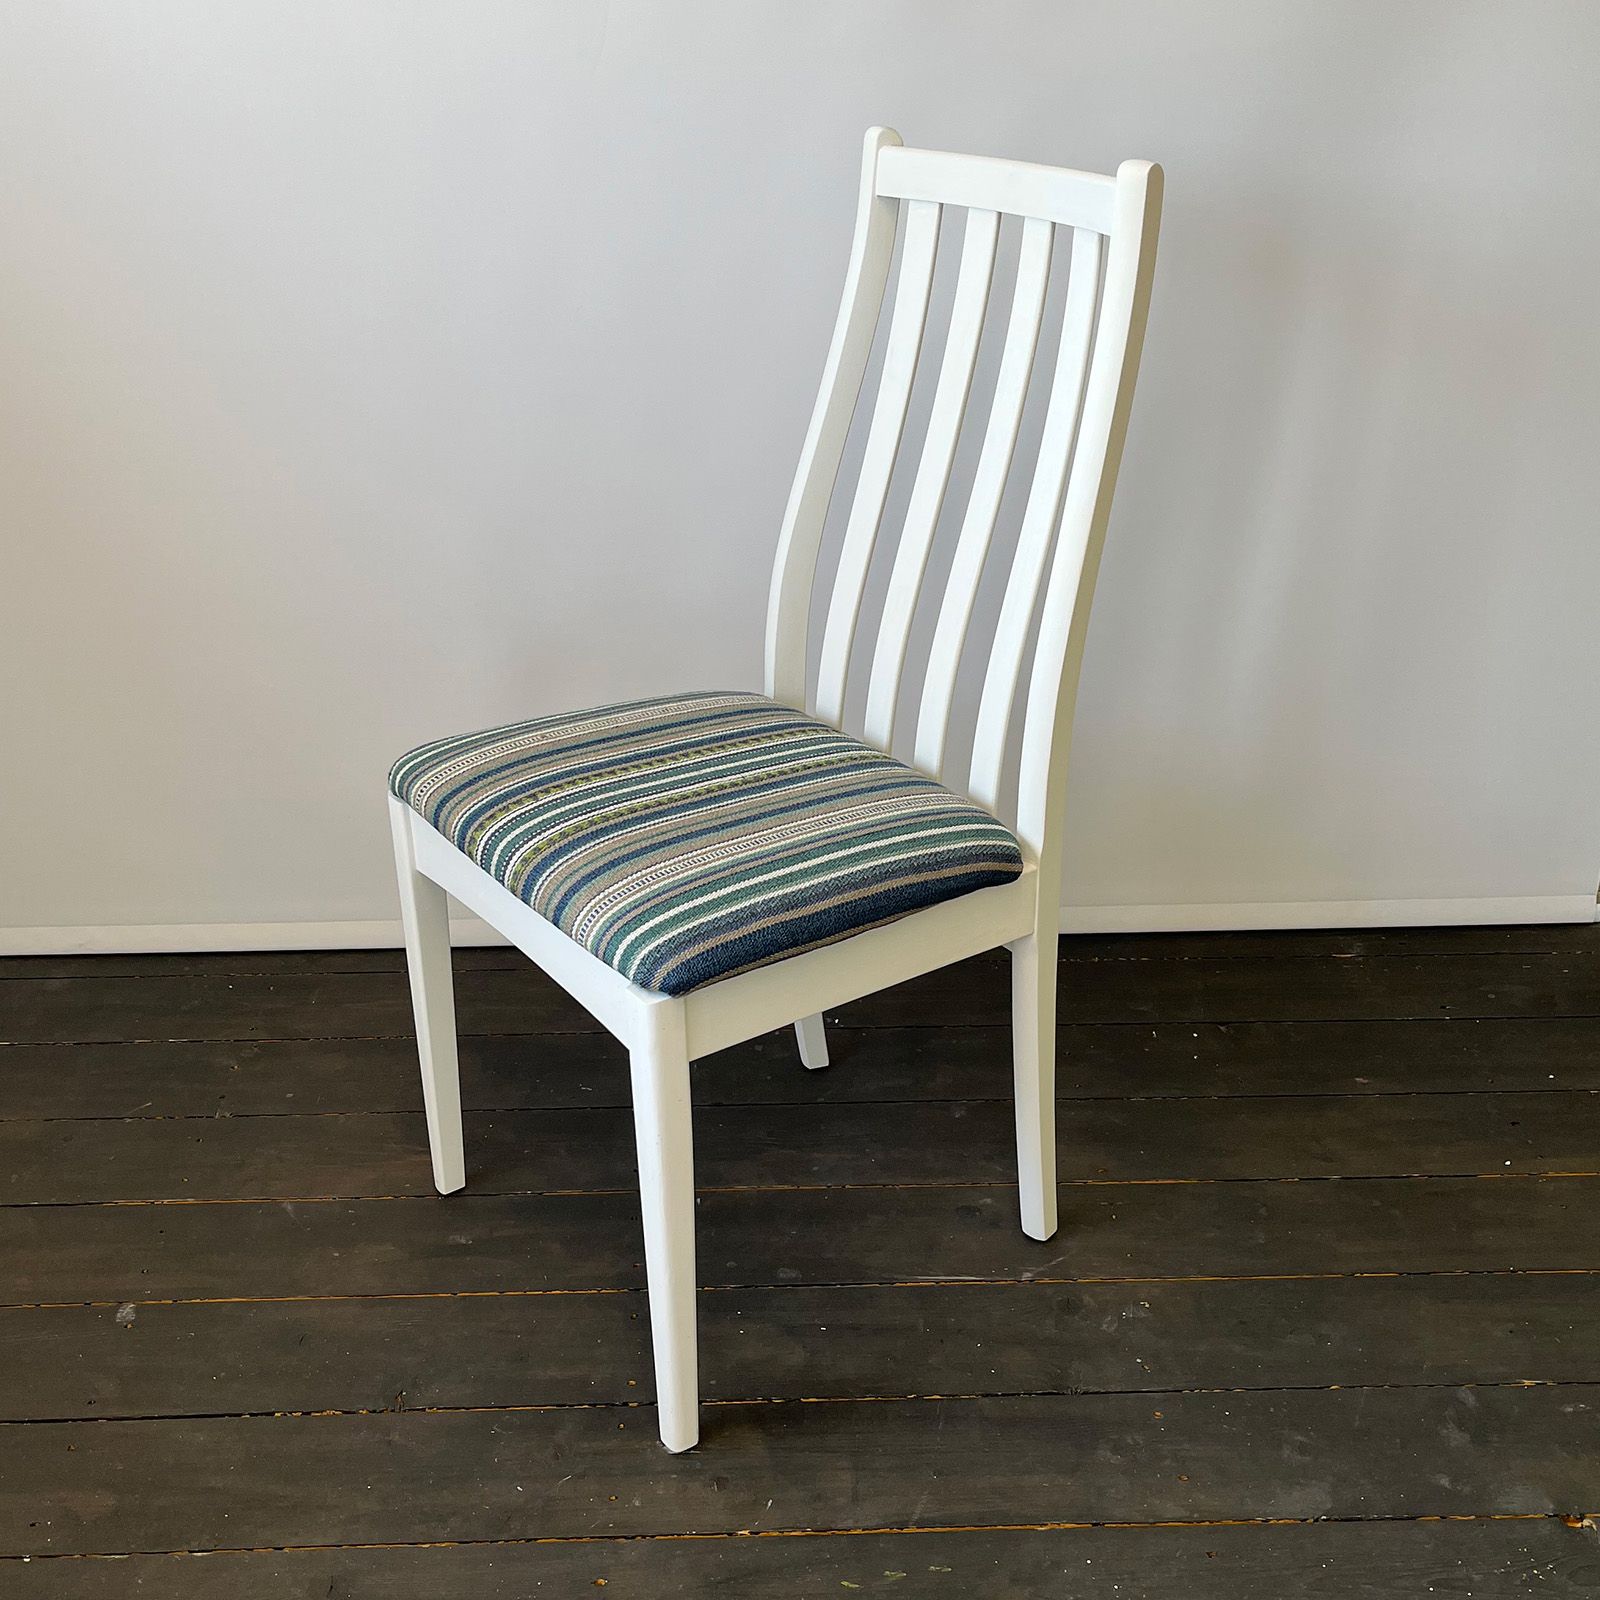 Ercol style chair ready for painting